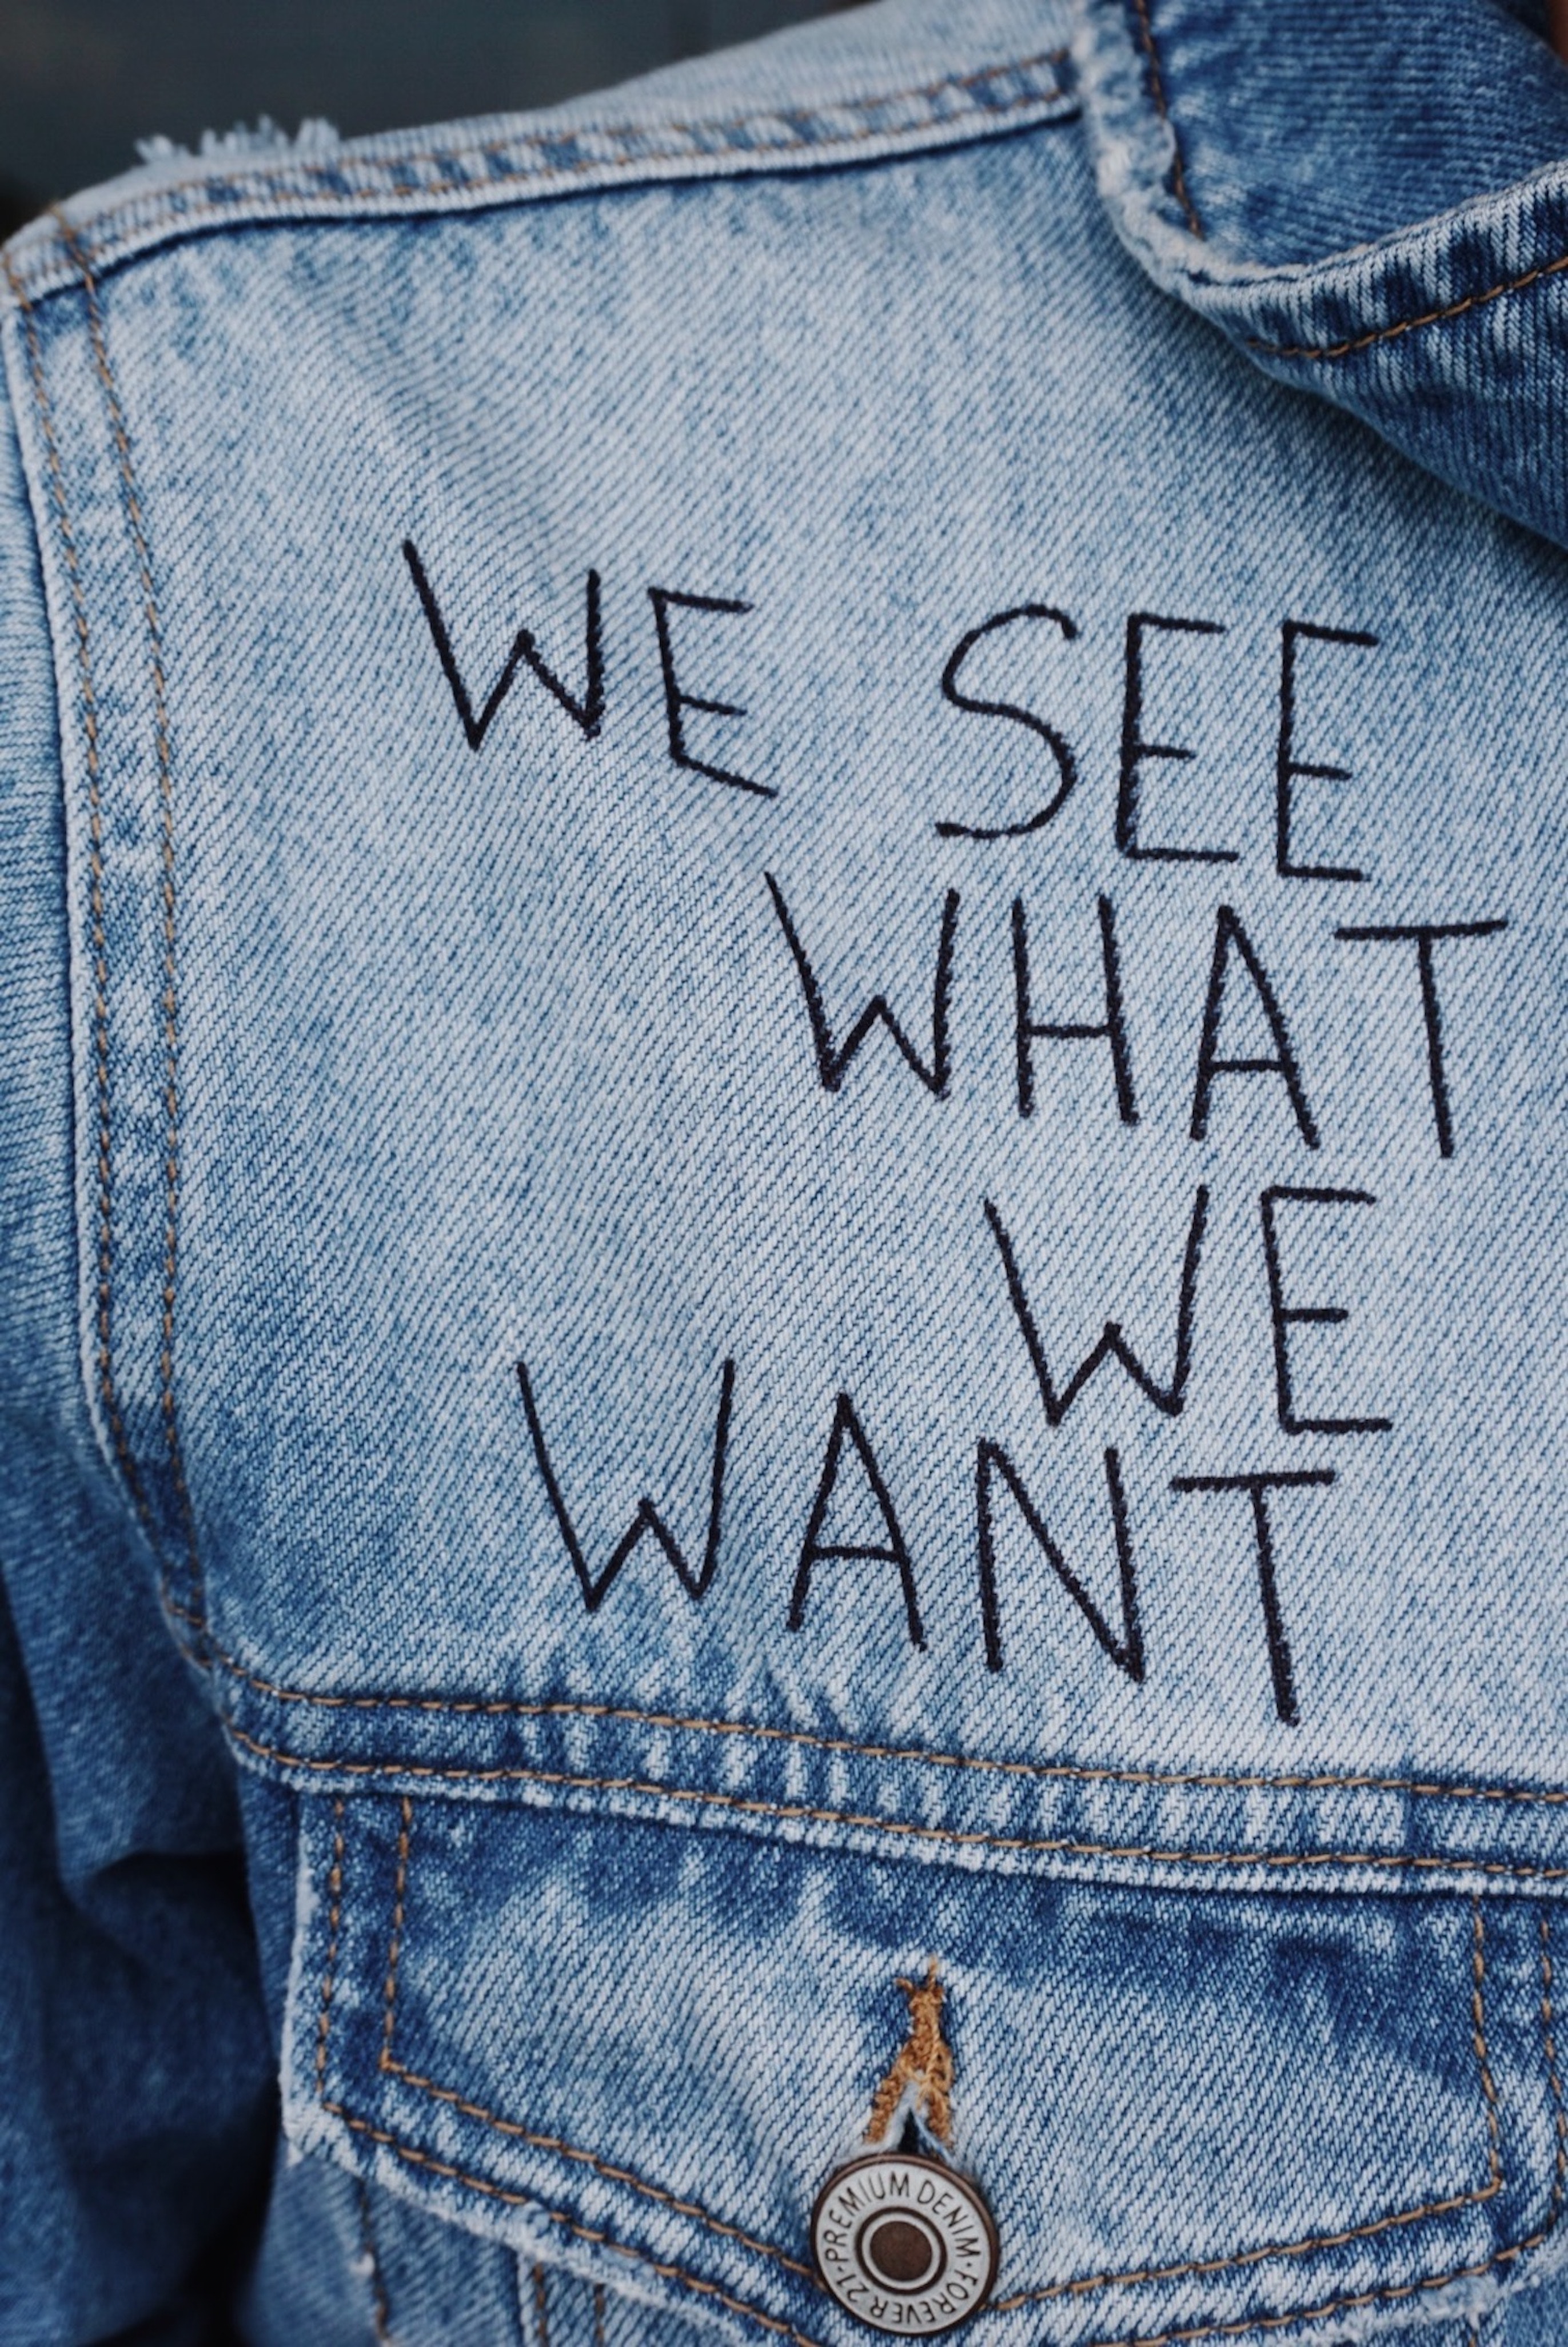 We See What We Want Jeans - HD Wallpaper 